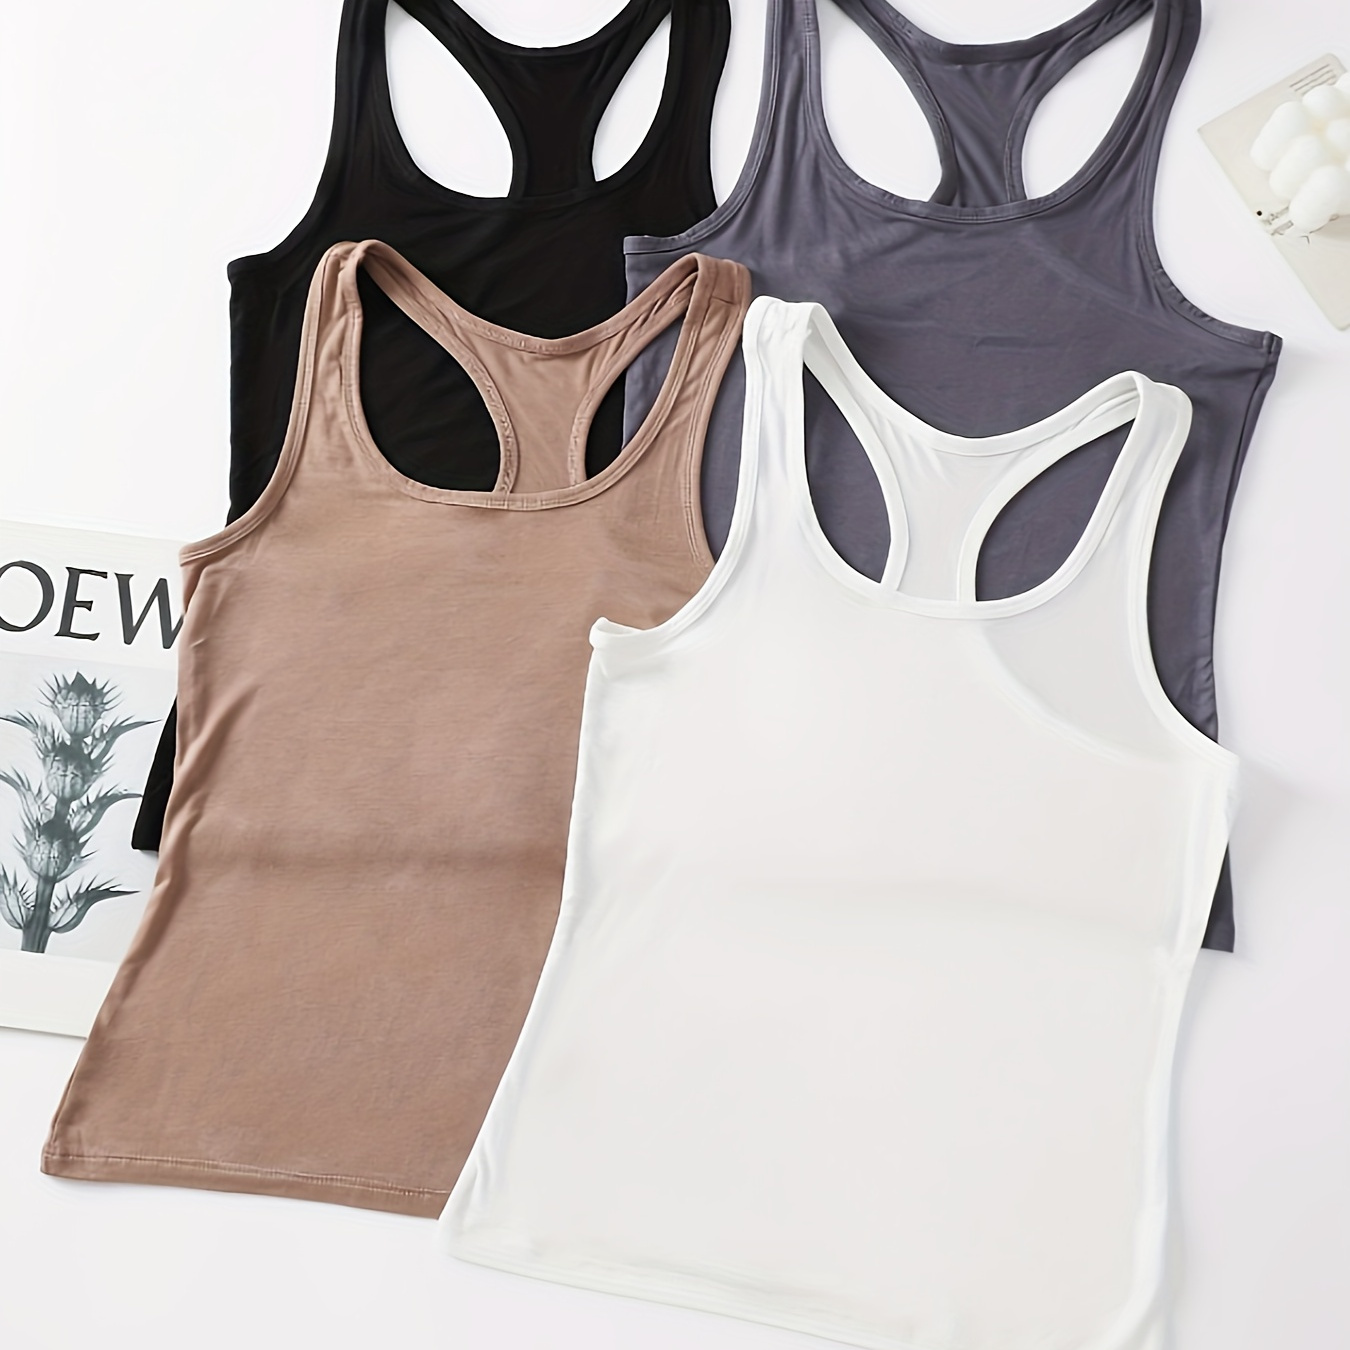 

4-pack Women's Comfortable Tank Tops For Lounge & Sport, Casual Style, Stretchable Fabric, Assorted Colors